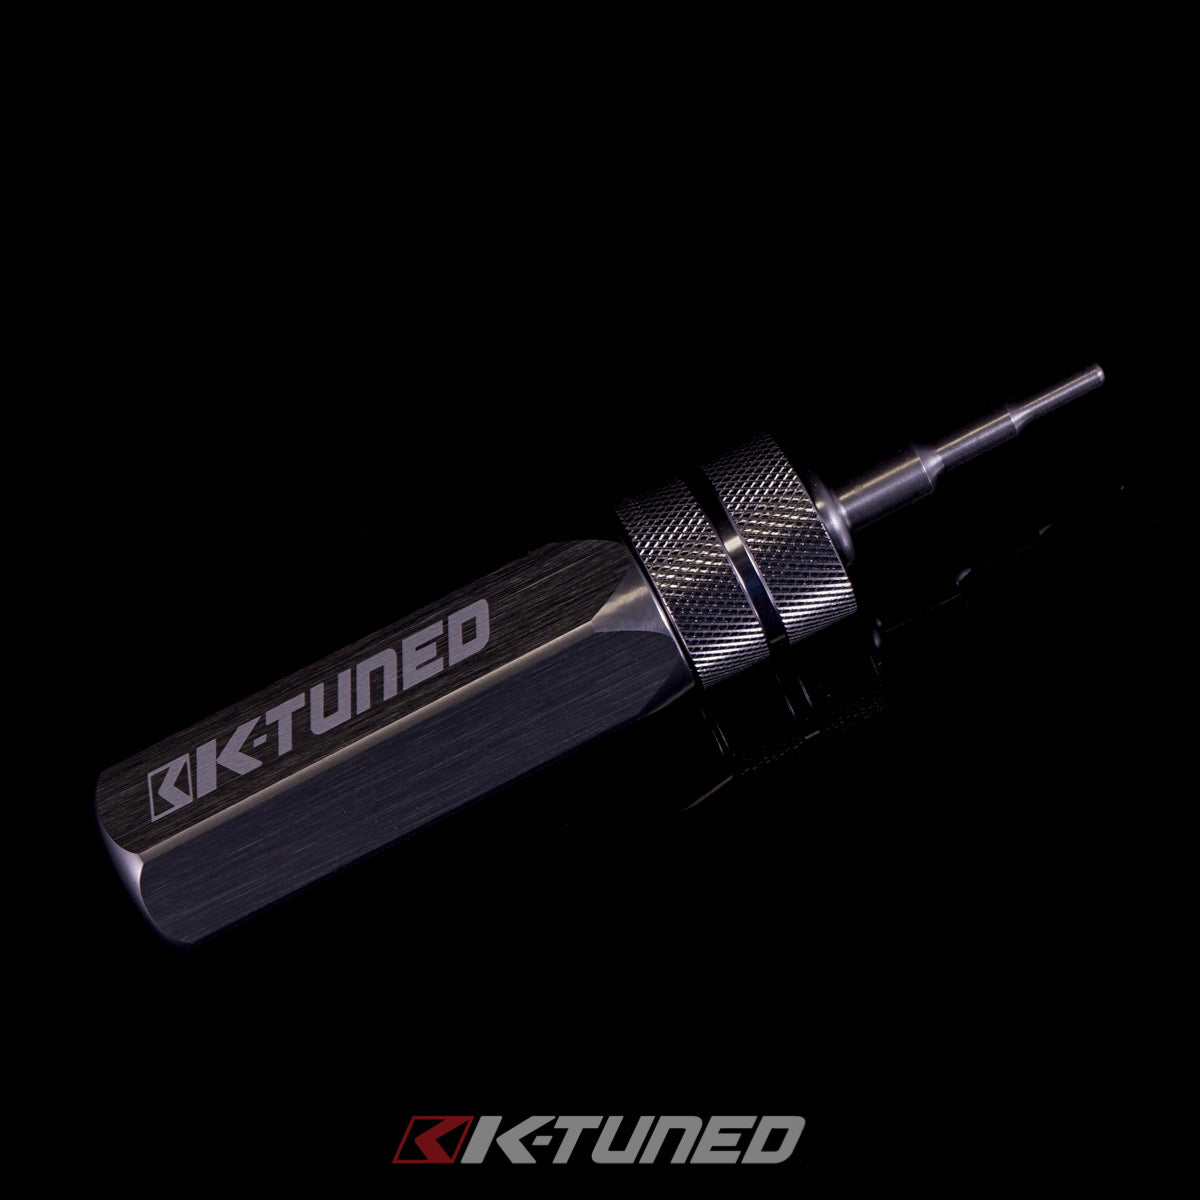 K-Tuned Assembly Tool - For High Pressure PTFE Fittings/Hose